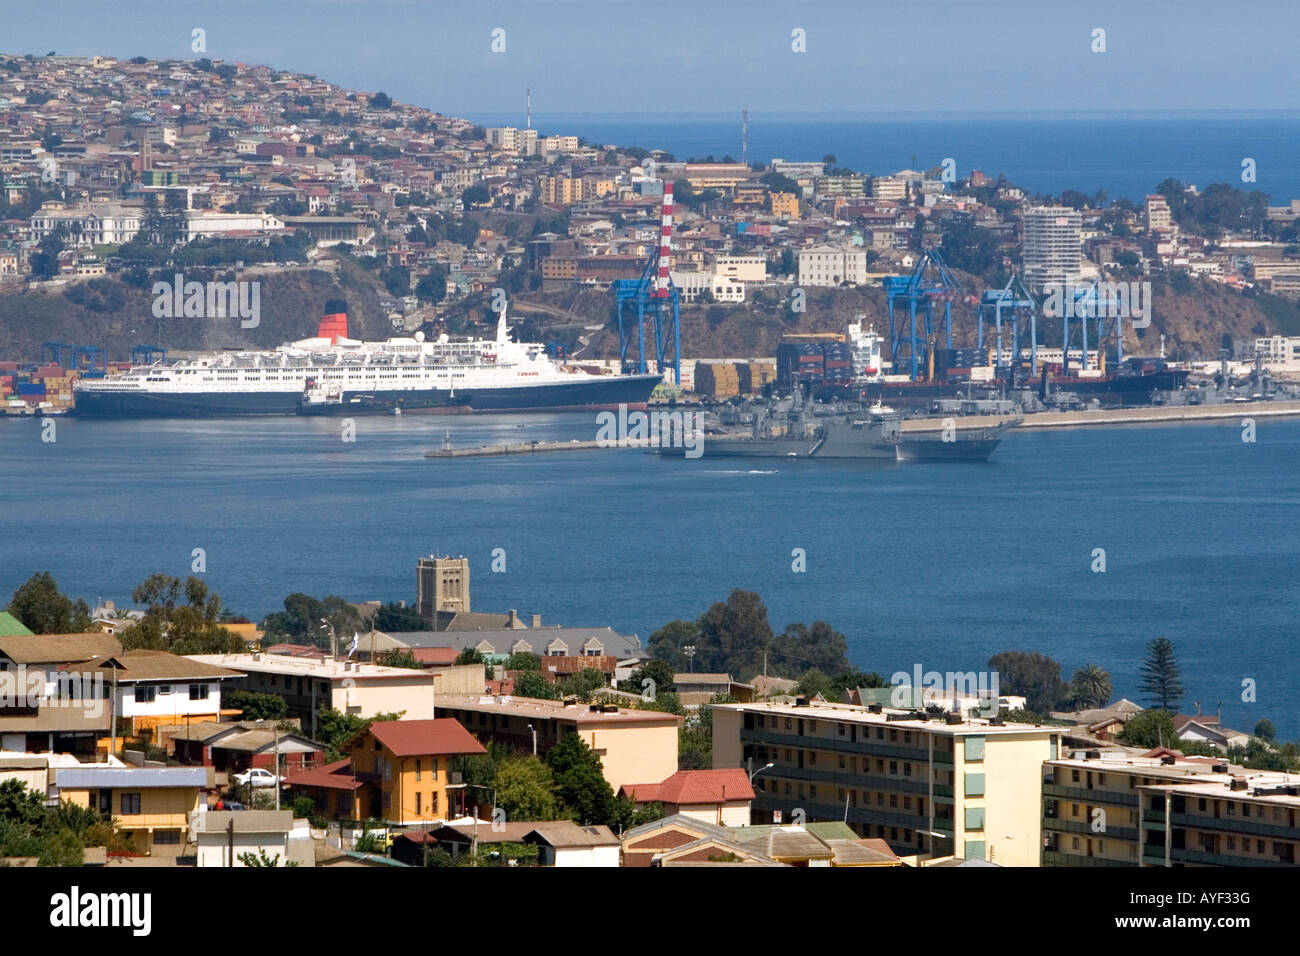 Queen Elizabeth II cruise ship docked in the Port at Valparaiso Chile Stock Photo